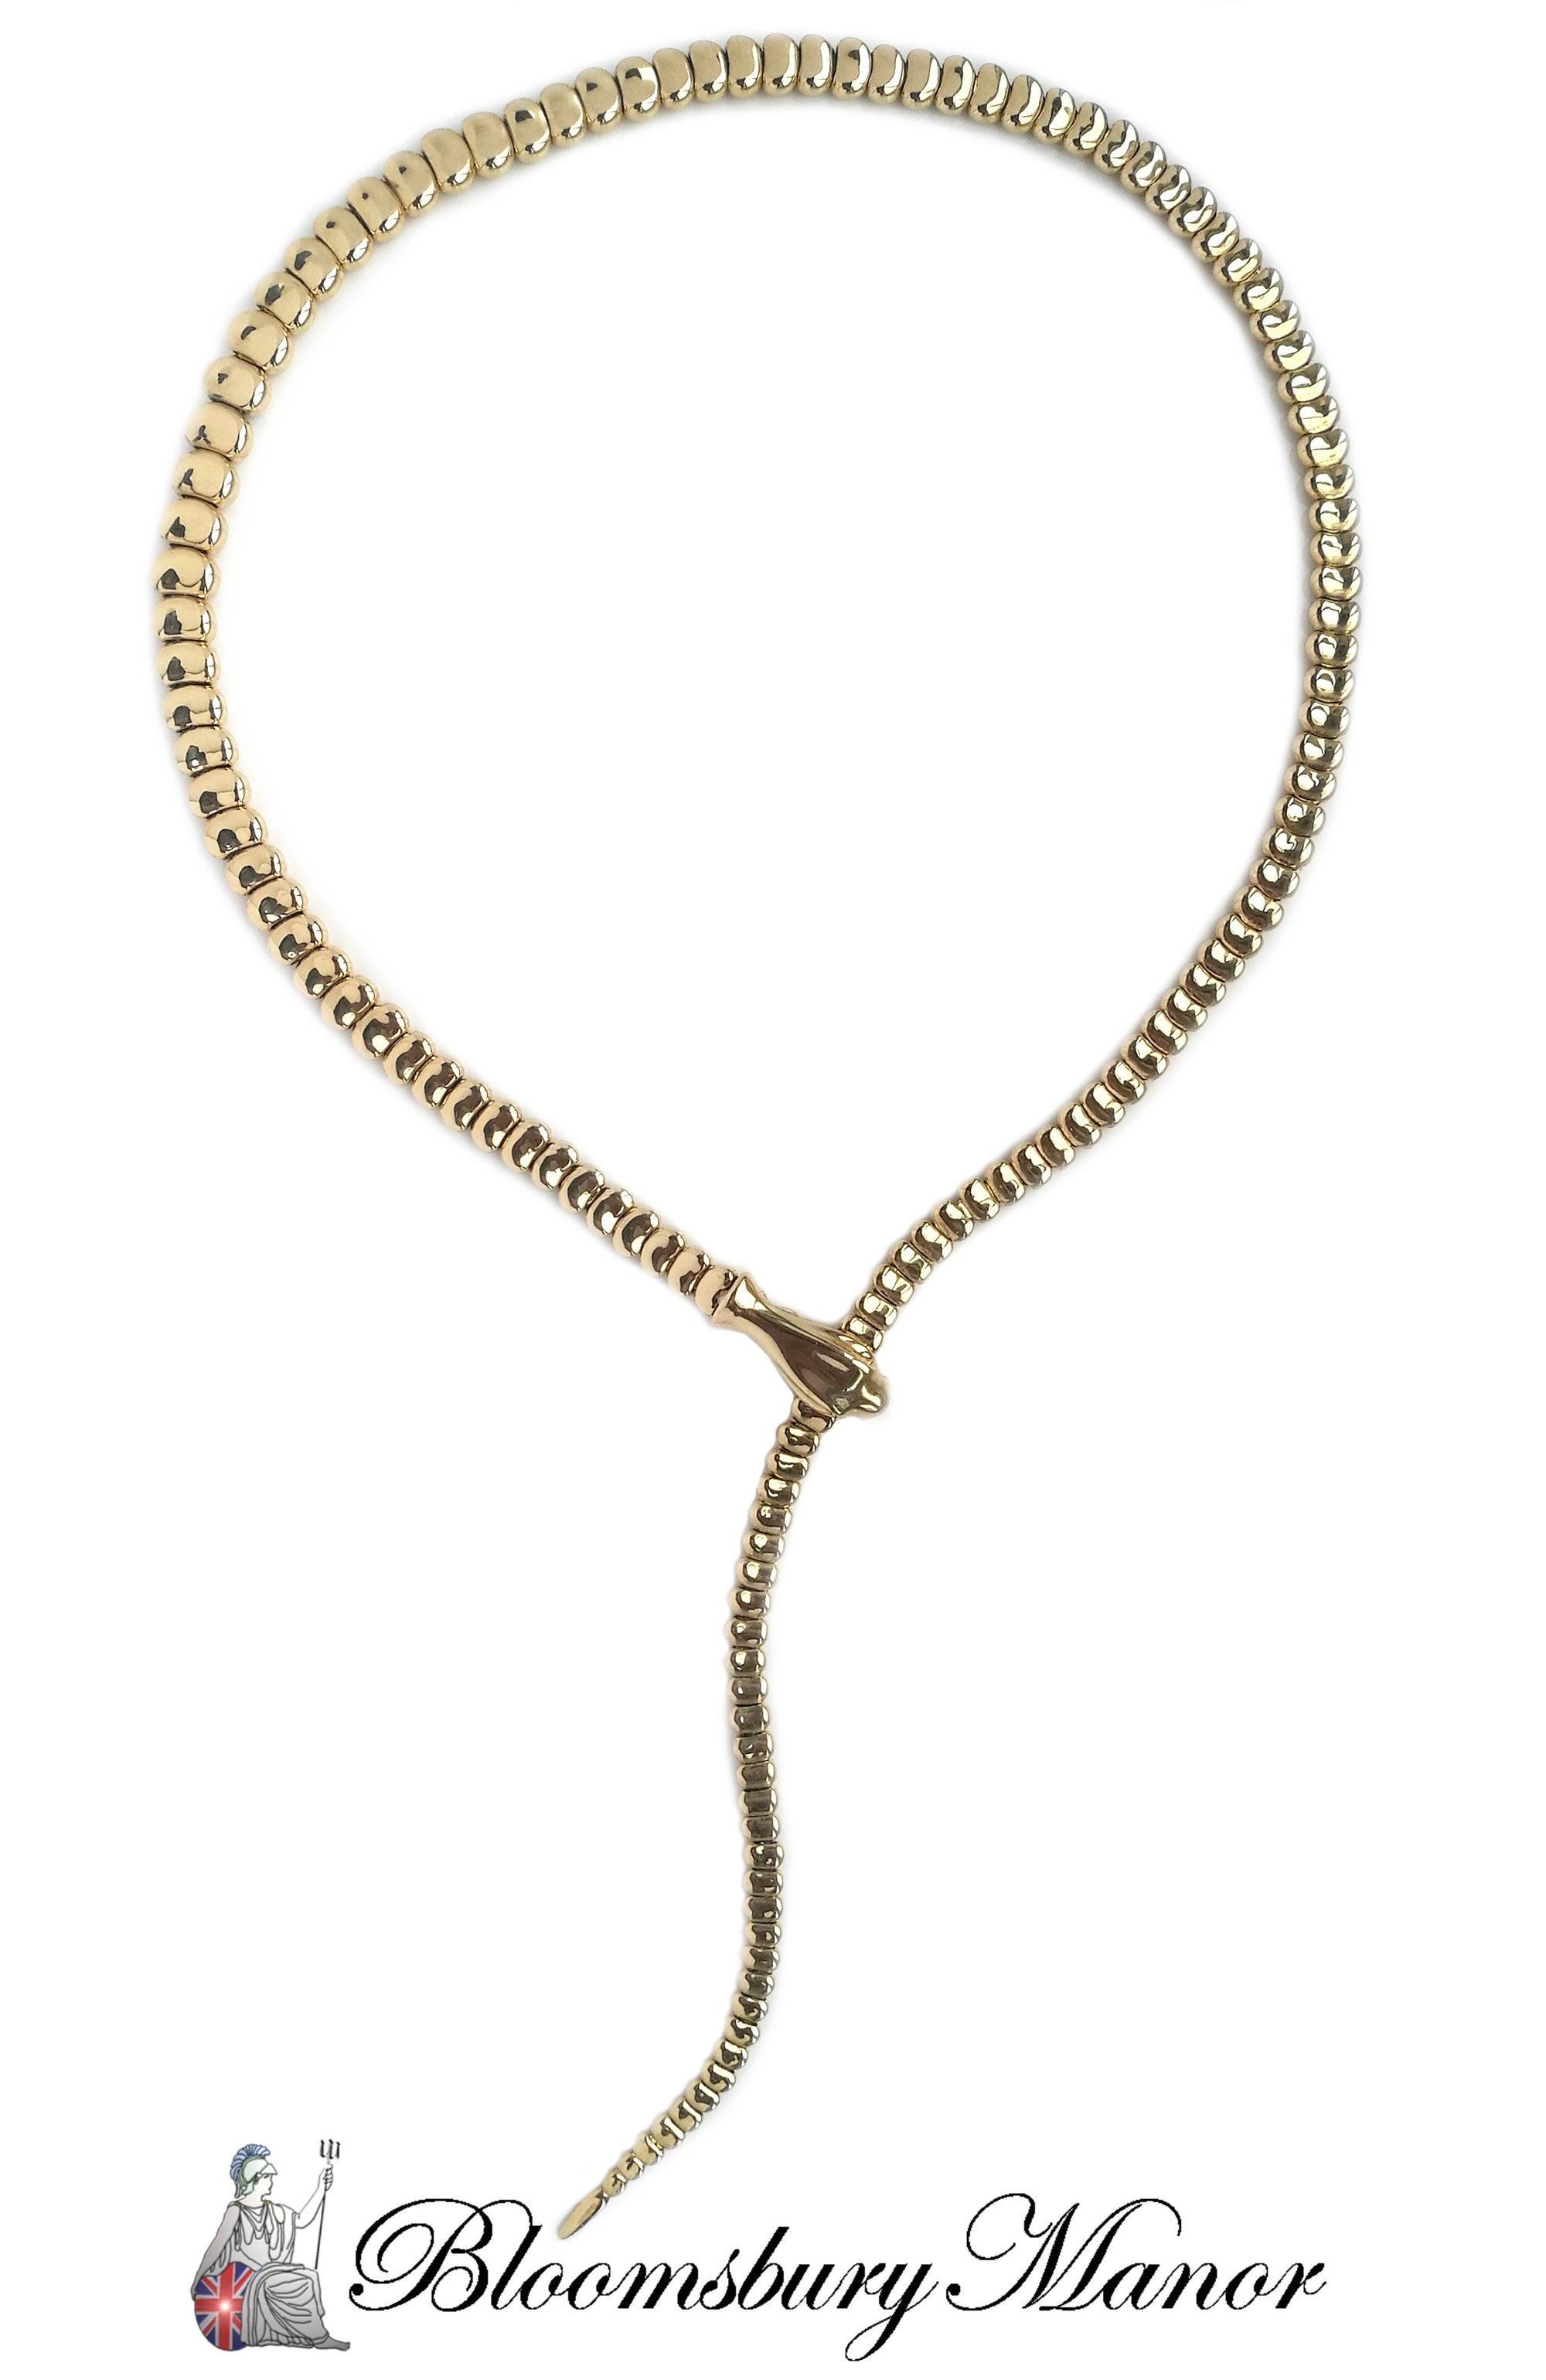 Tiffany & Co. Snake / Serpent Necklace in 18k Yellow Gold, 20 inch